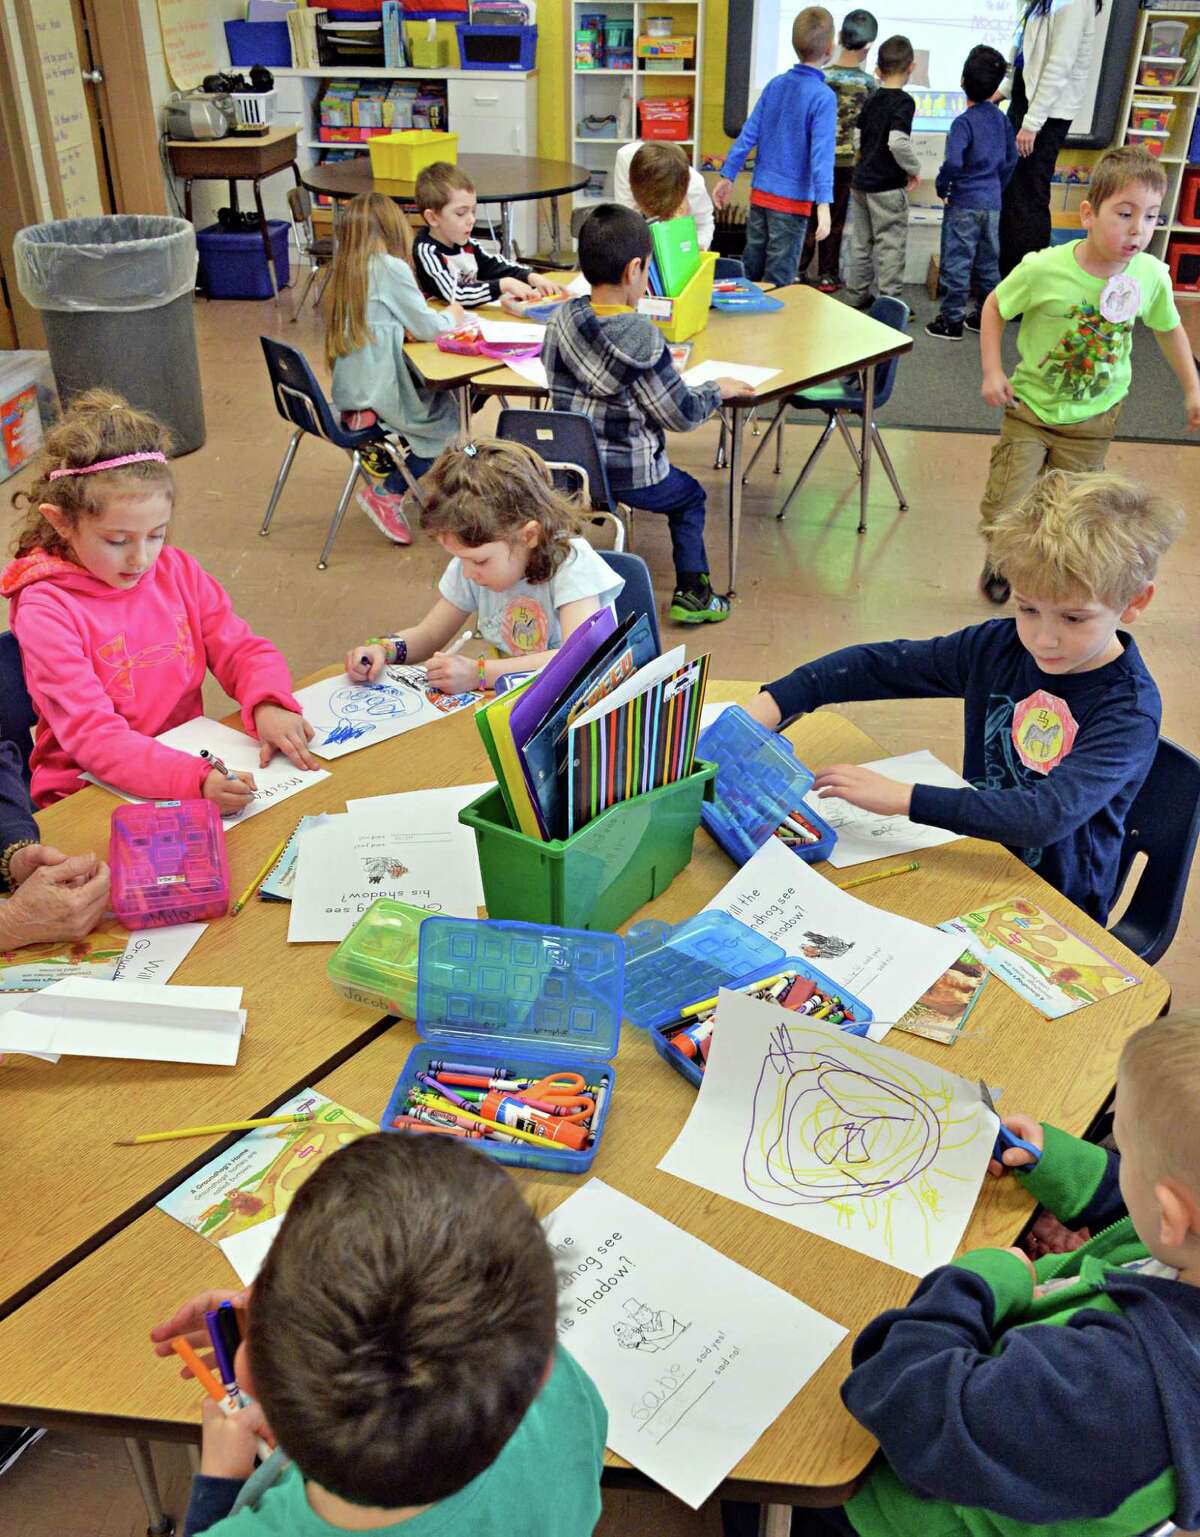 Skano Elementary School Kindergarten students study during class Friday, Jan. 31, 2014, in Clifton Park, N.Y. (John Carl D'Annibale / Times Union)